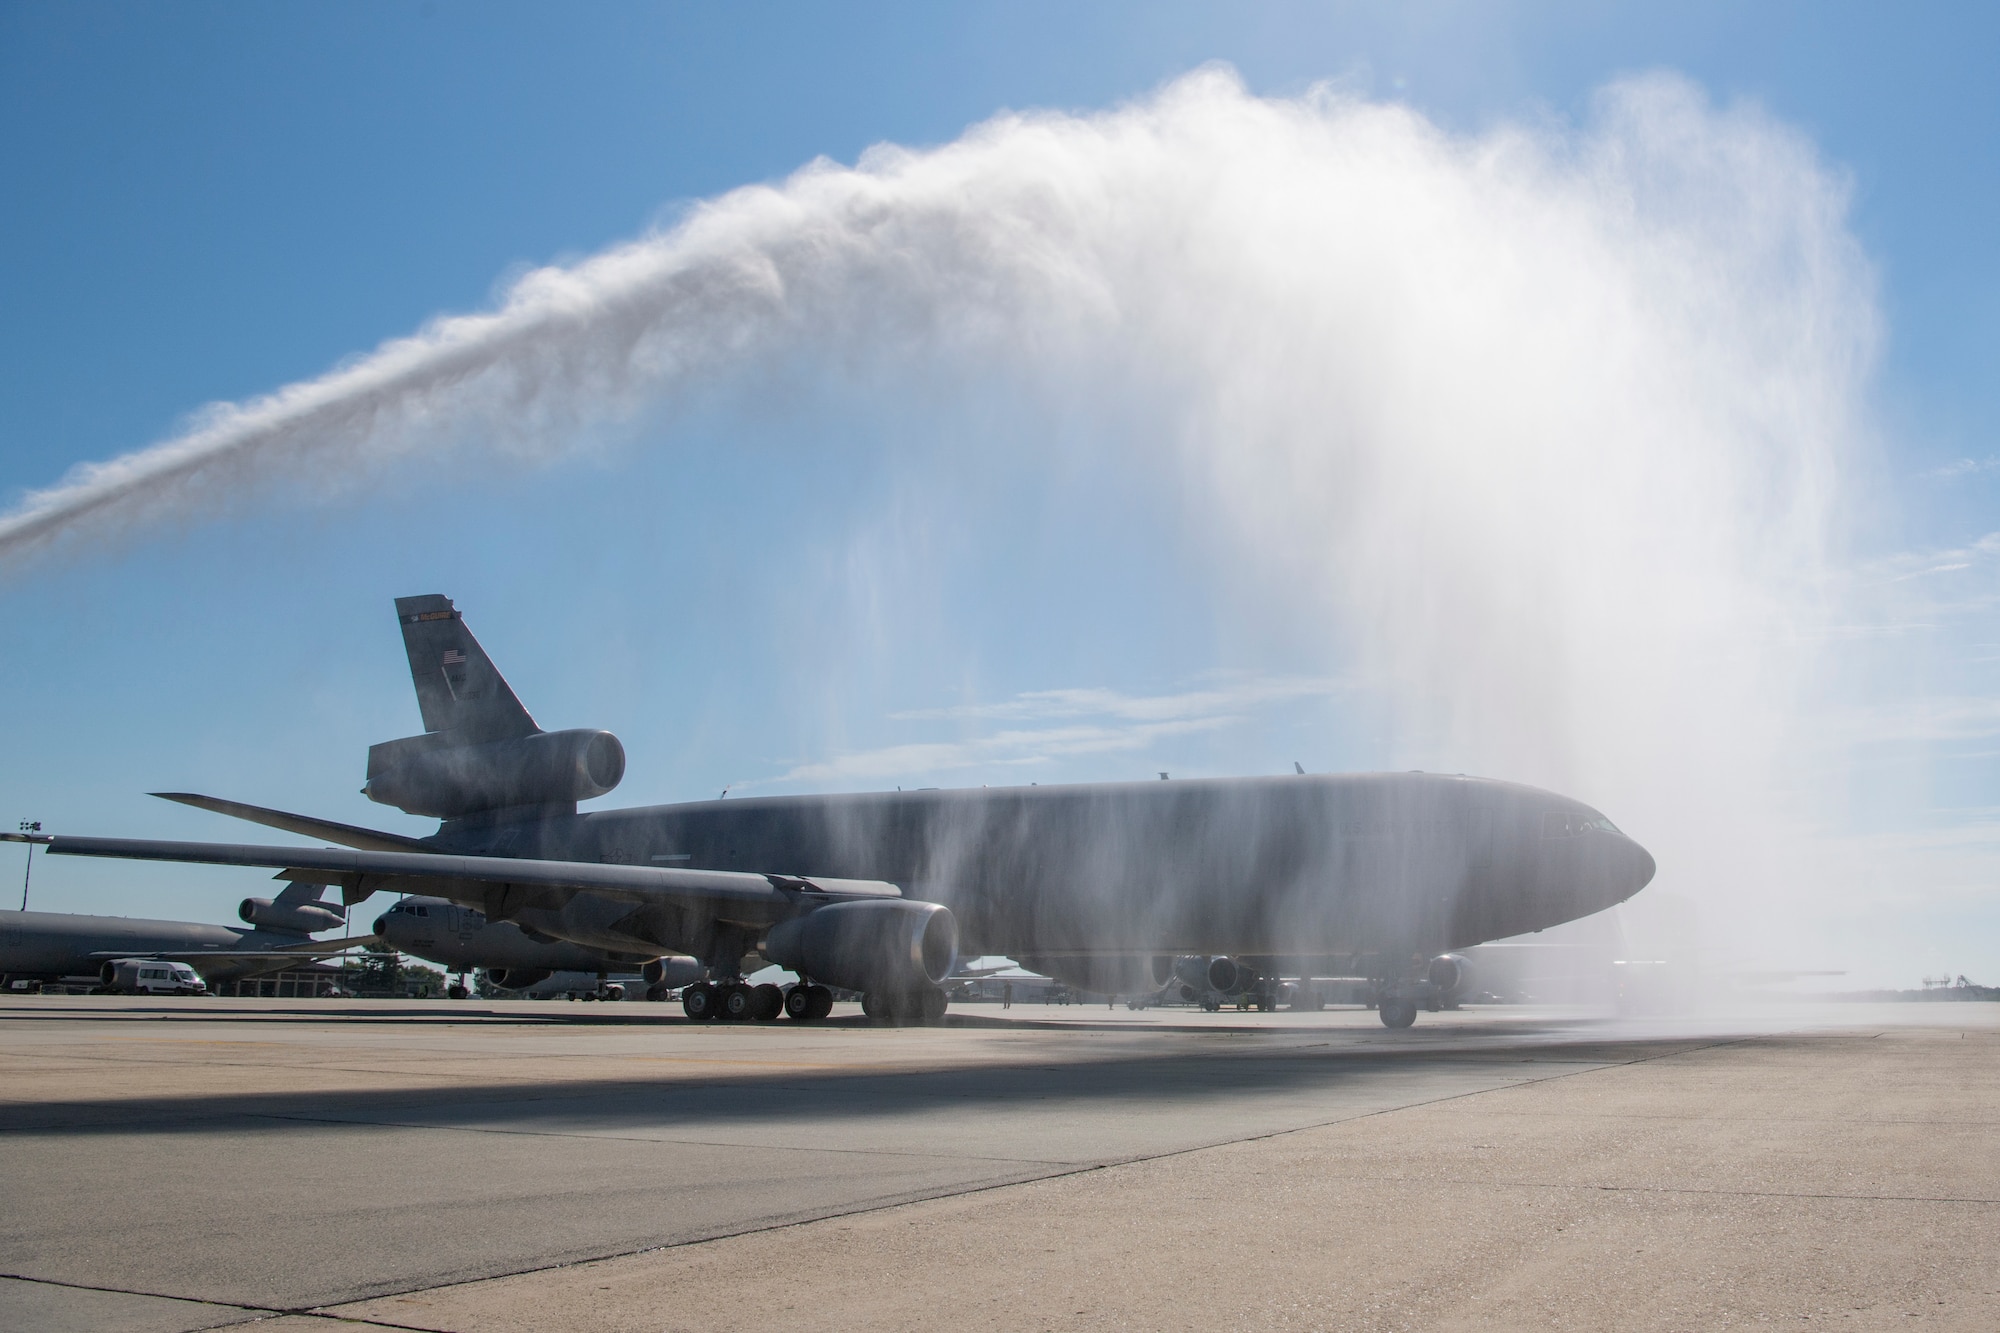 KC-10 Extender tail #86-0036 receives a traditional water salute as the 514th Air Mobility Wing U.S. Air Force Lt. Col. Mike Pillion prepares to fly it to the 309th Aerospace Maintenance and Regeneration Group at Davis-Monthan Air Force Base, Ariz., following a July 13 ceremony at Joint Base McGuire-Dix-Lakehurst, N.J., that marked the first retirement of 59 Extenders scheduled for eventual replacement by the KC-46A Pegasus. A total of three KC-10s from the Air Force’s Backup-Aircraft Inventory were congressionally approved for retirement during Fiscal Year 2020. As KC-10s are retired, the 309th AMARG will continue to support the remaining Extenders as they are flown for several years while the KC-46A Pegasus is integrated into Air Mobility Command’s Total Force tanker enterprise. For nearly four decades, the KC-10 has helped secure global reach for America, providing in-flight refueling to U.S. and coalition aircraft, from Operations Desert Shield and Desert Storm to Operation Inherent Resolve. The KC-10 is flown from JBMDL by both the 305th AMW and its associate Air Force Reserve unit, the 514th AMW.